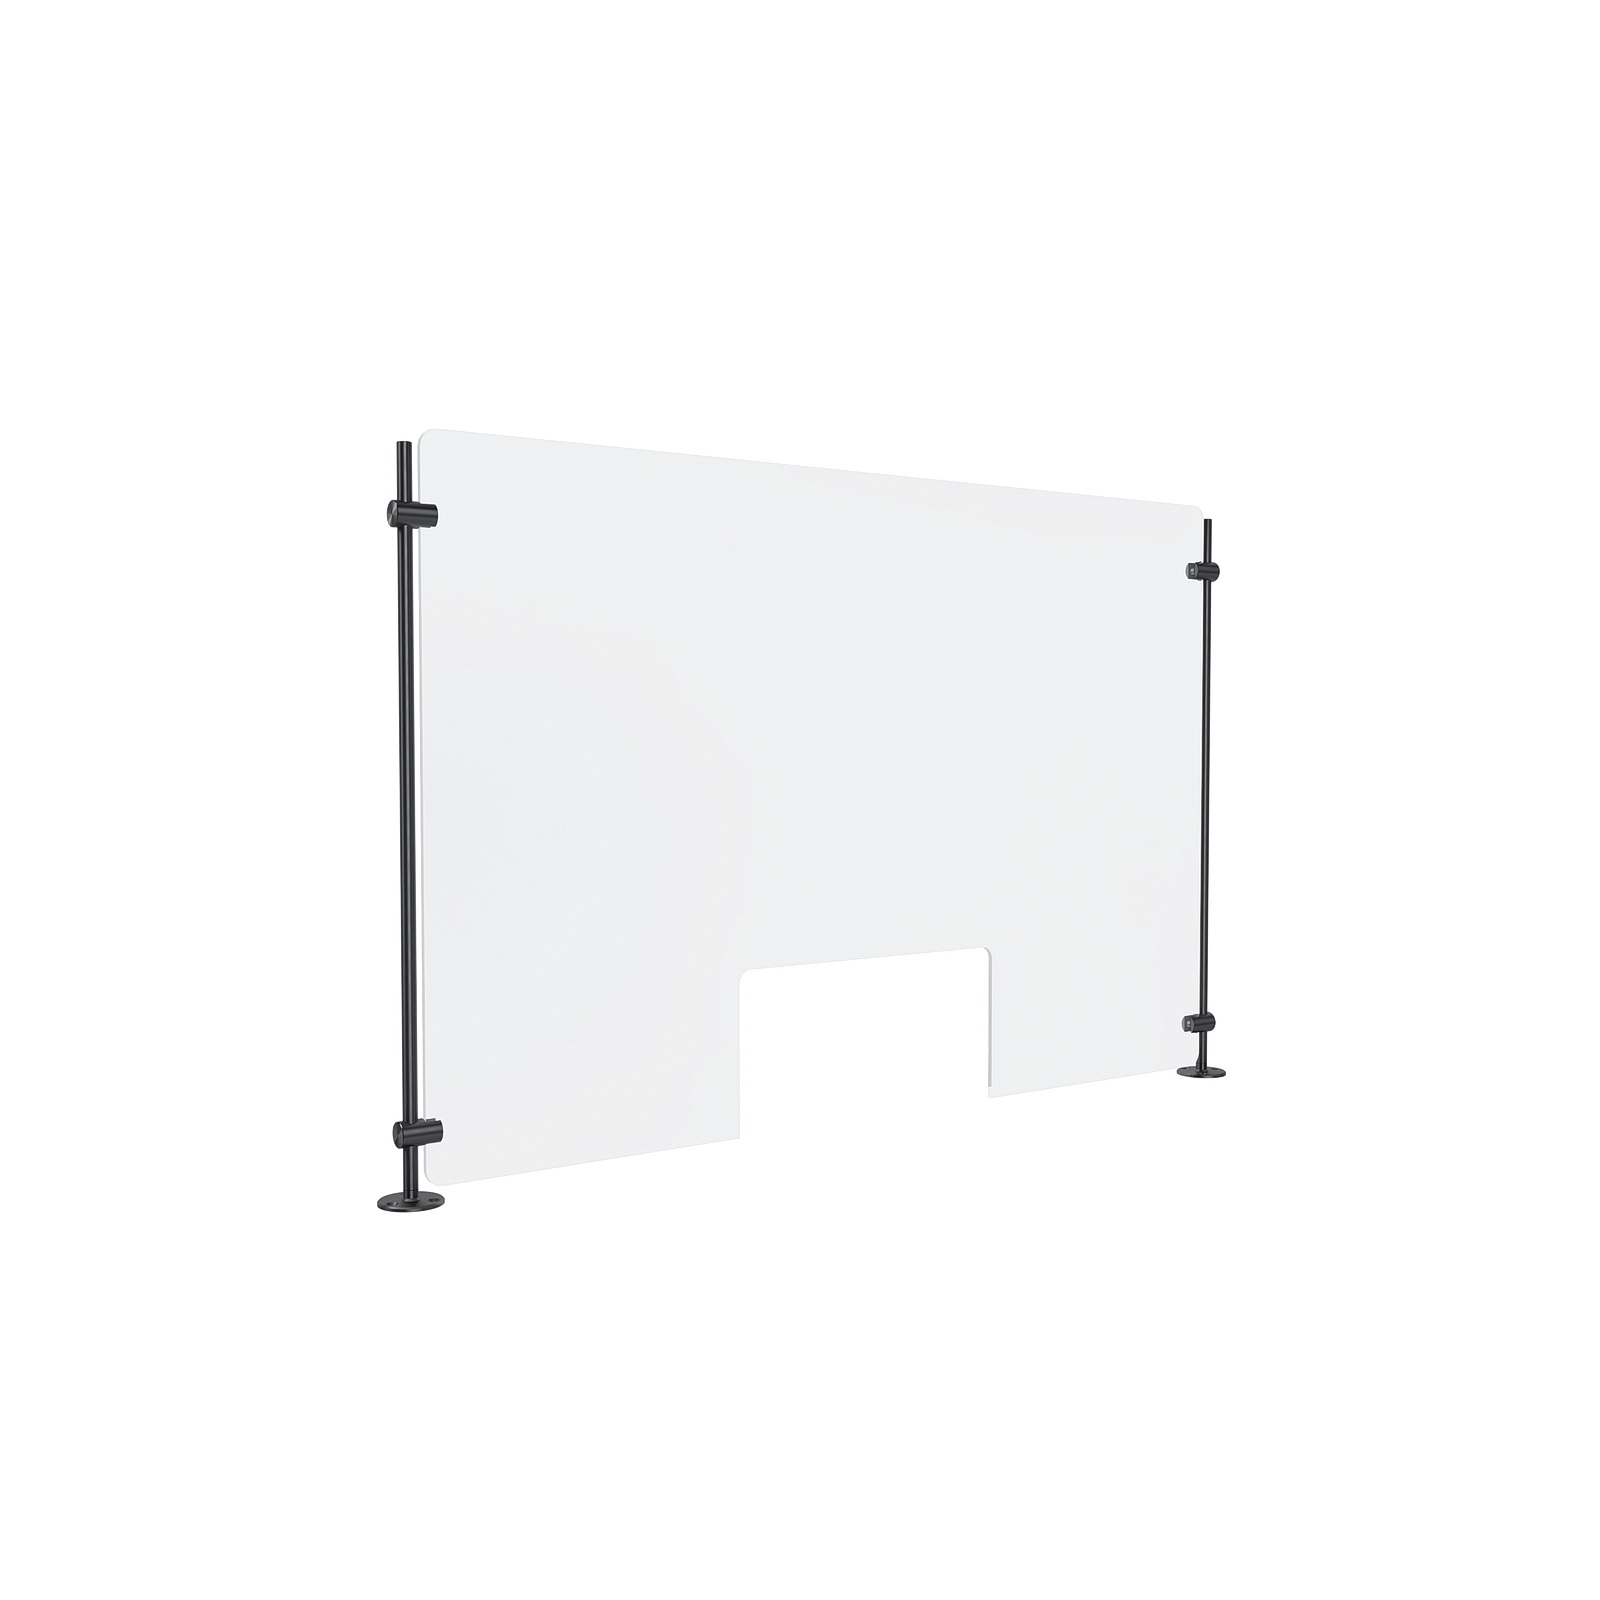 Clear Acrylic Sneeze Guard 30'' Wide x 20'' Tall (10'' x 5'' Cut Out), with (2) 20'' Tall x 3/8'' Diameter Black Anodized Aluminum Rod on the Side..